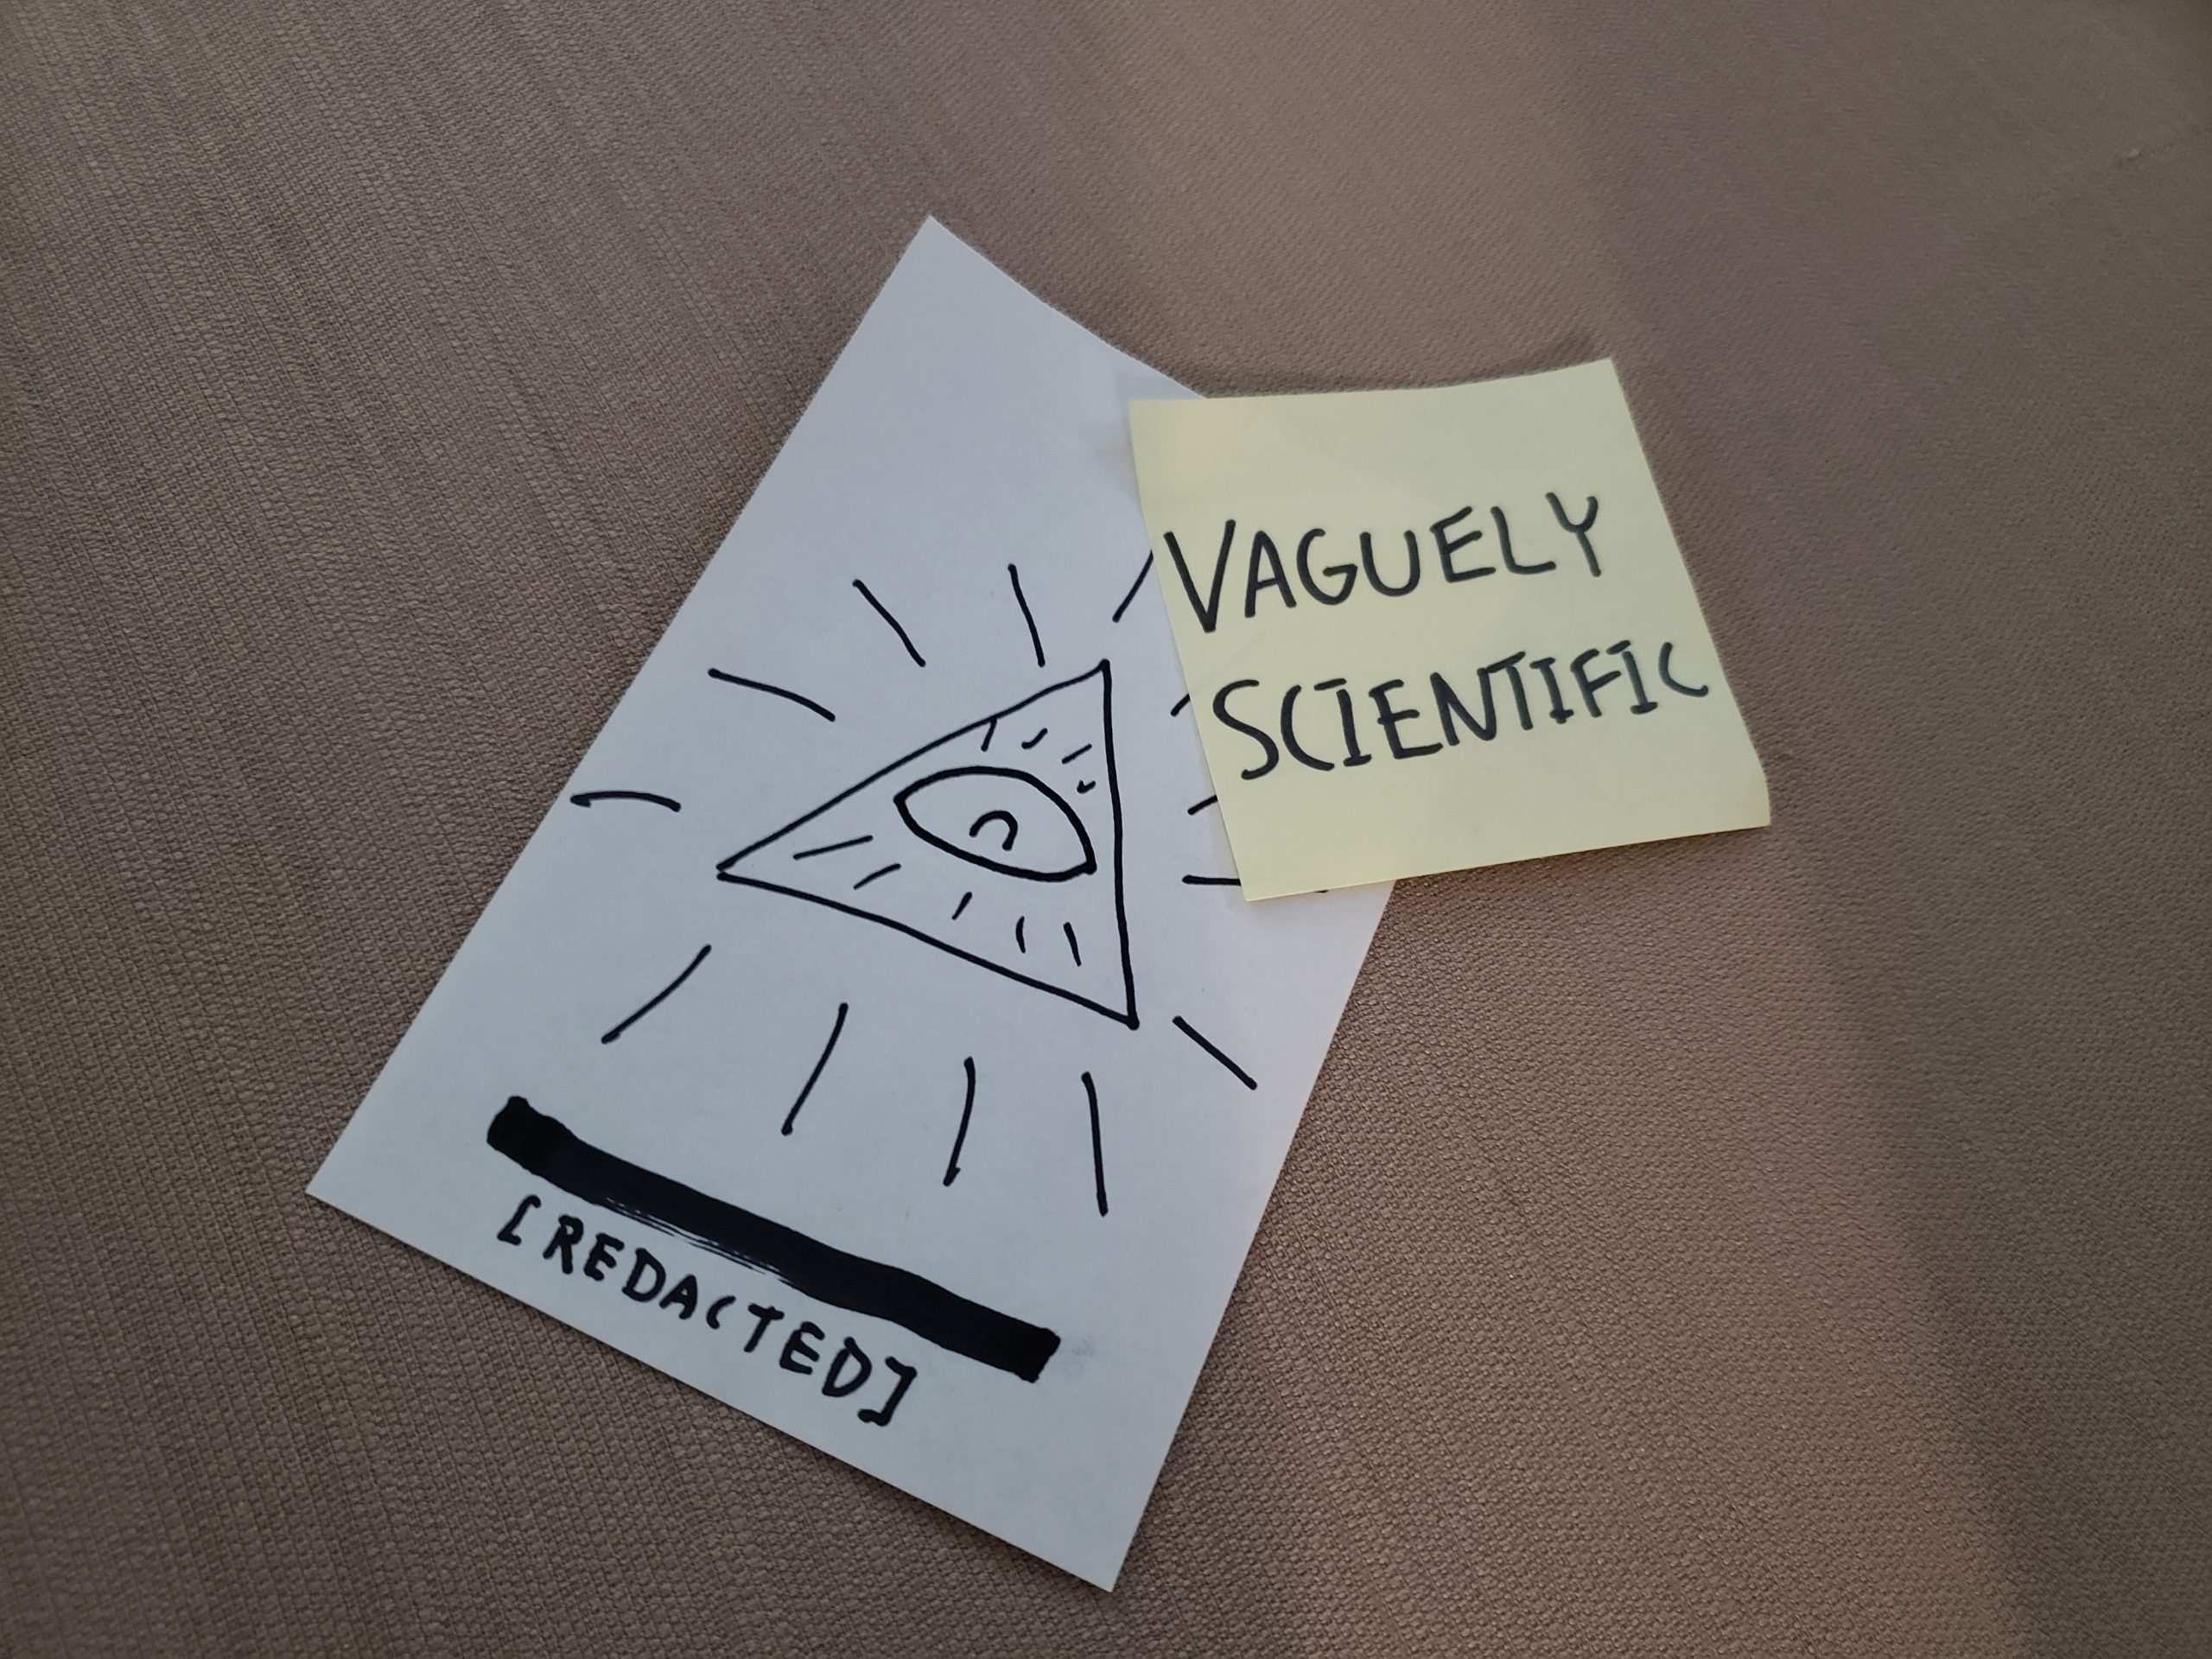 The Illuminati's business card with the Vaguely Scientific logo attached.